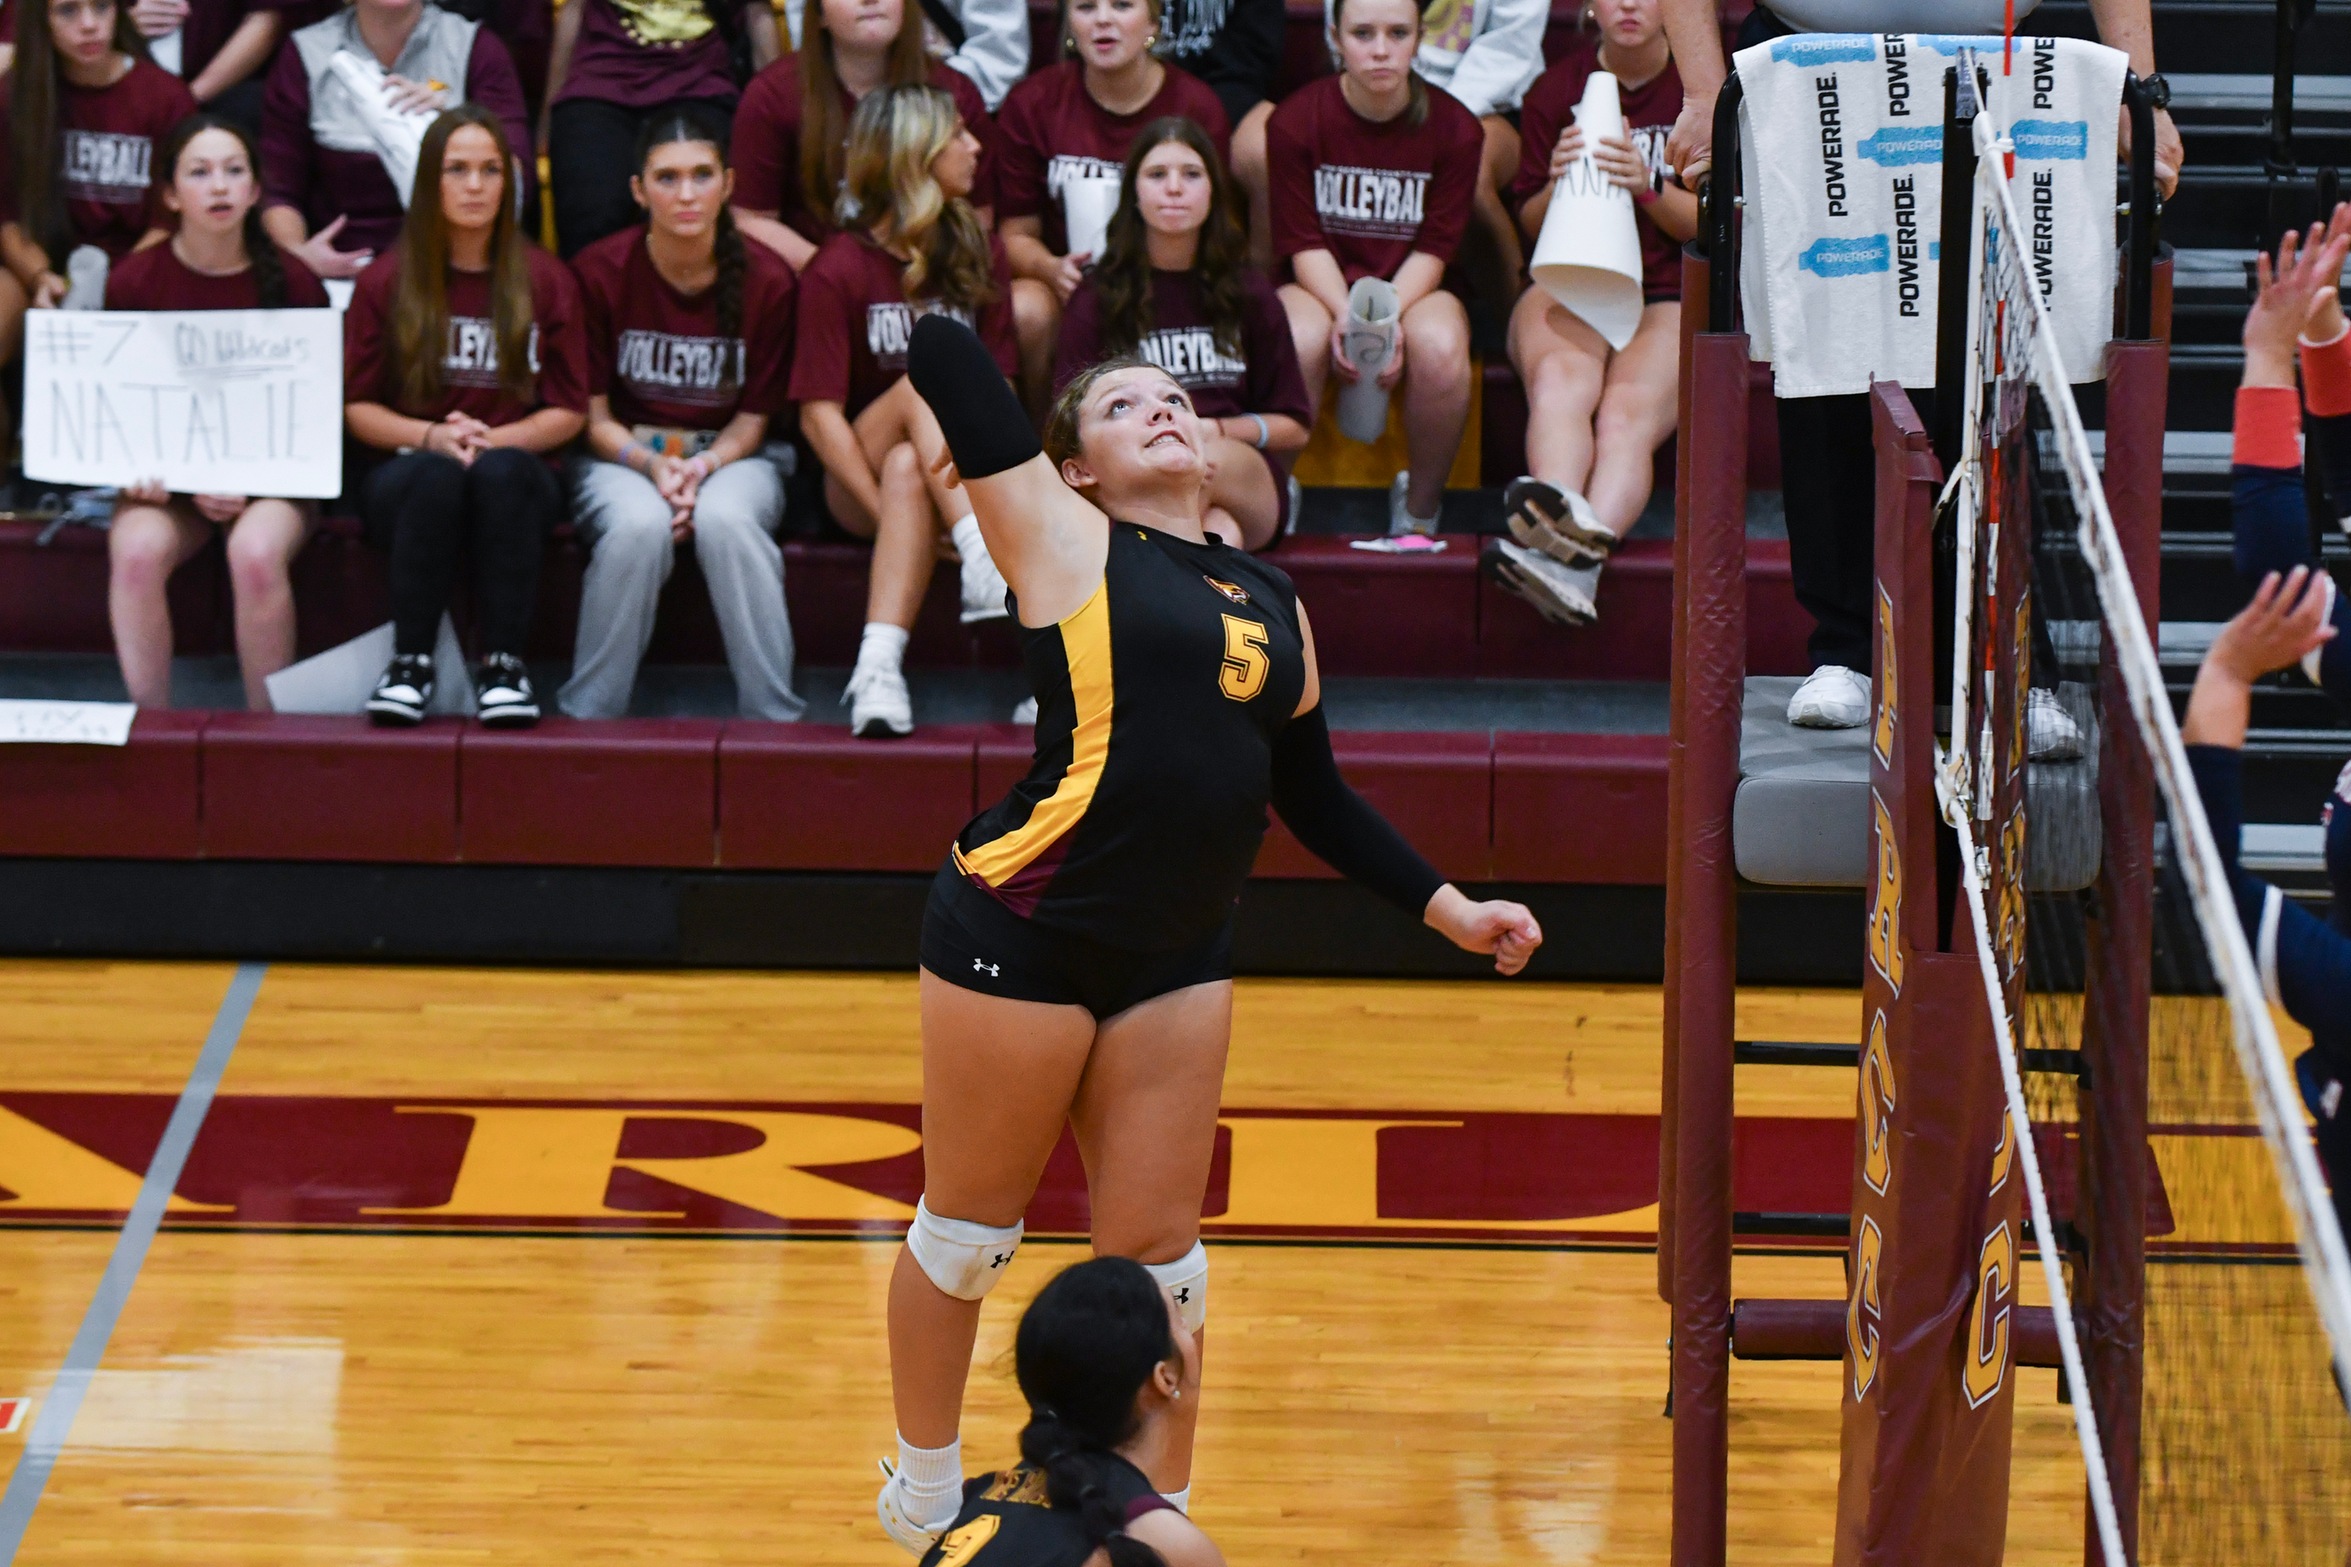 Pearl River advances to Day 2 of ACCC Volleyball Championship